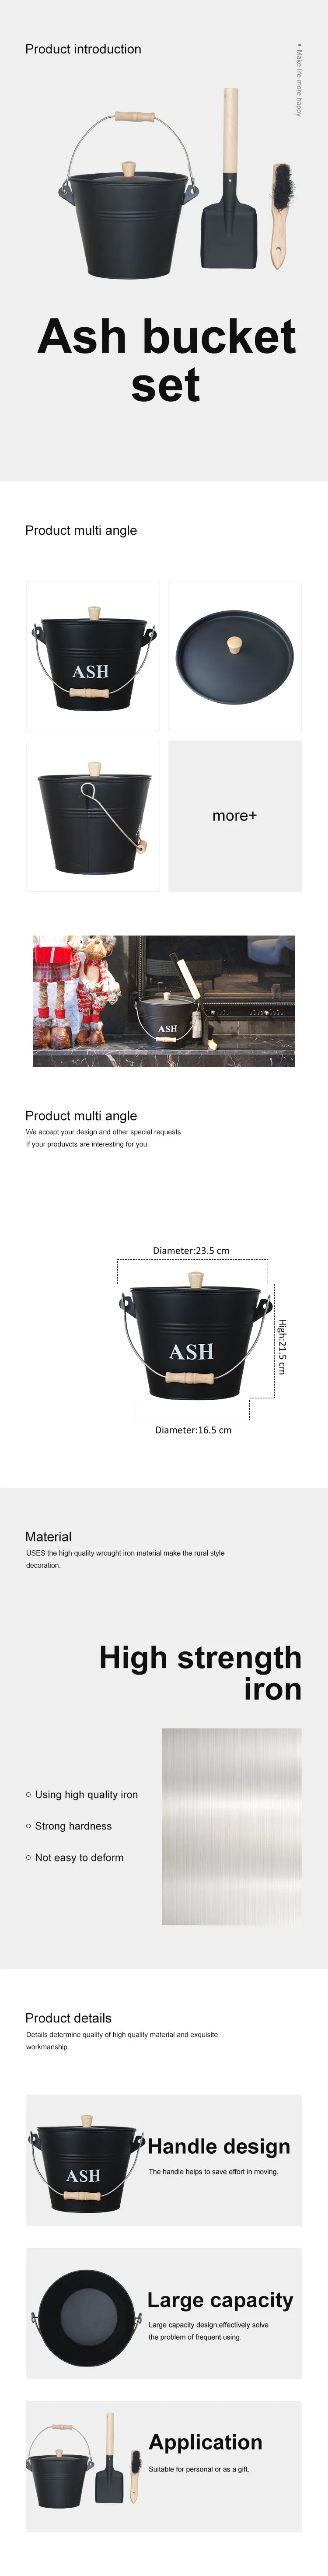 Ash bucket set Bucket with Lid Shovel & Hand Broom Tool Set Accessories for Fireplace Indoor and Outdoor Fireside accessories